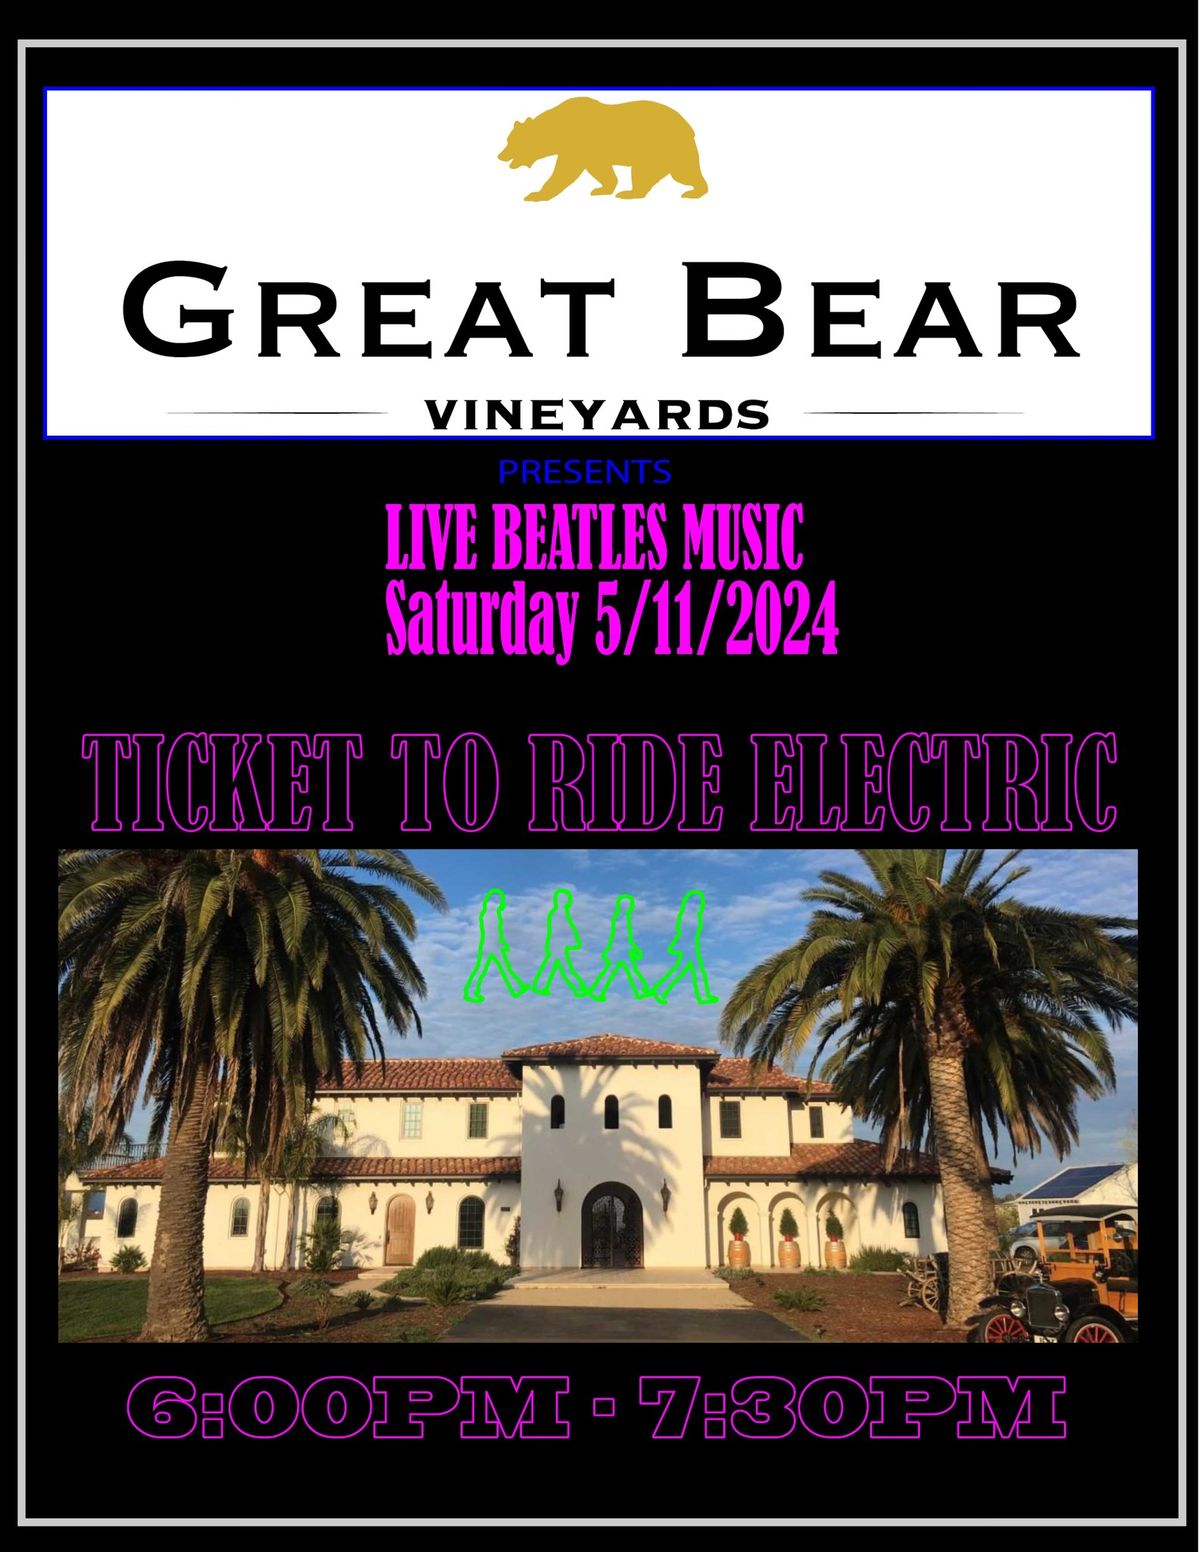 Ticket To Ride Electric at Great Bear Vineyards, Saturday May 11th!